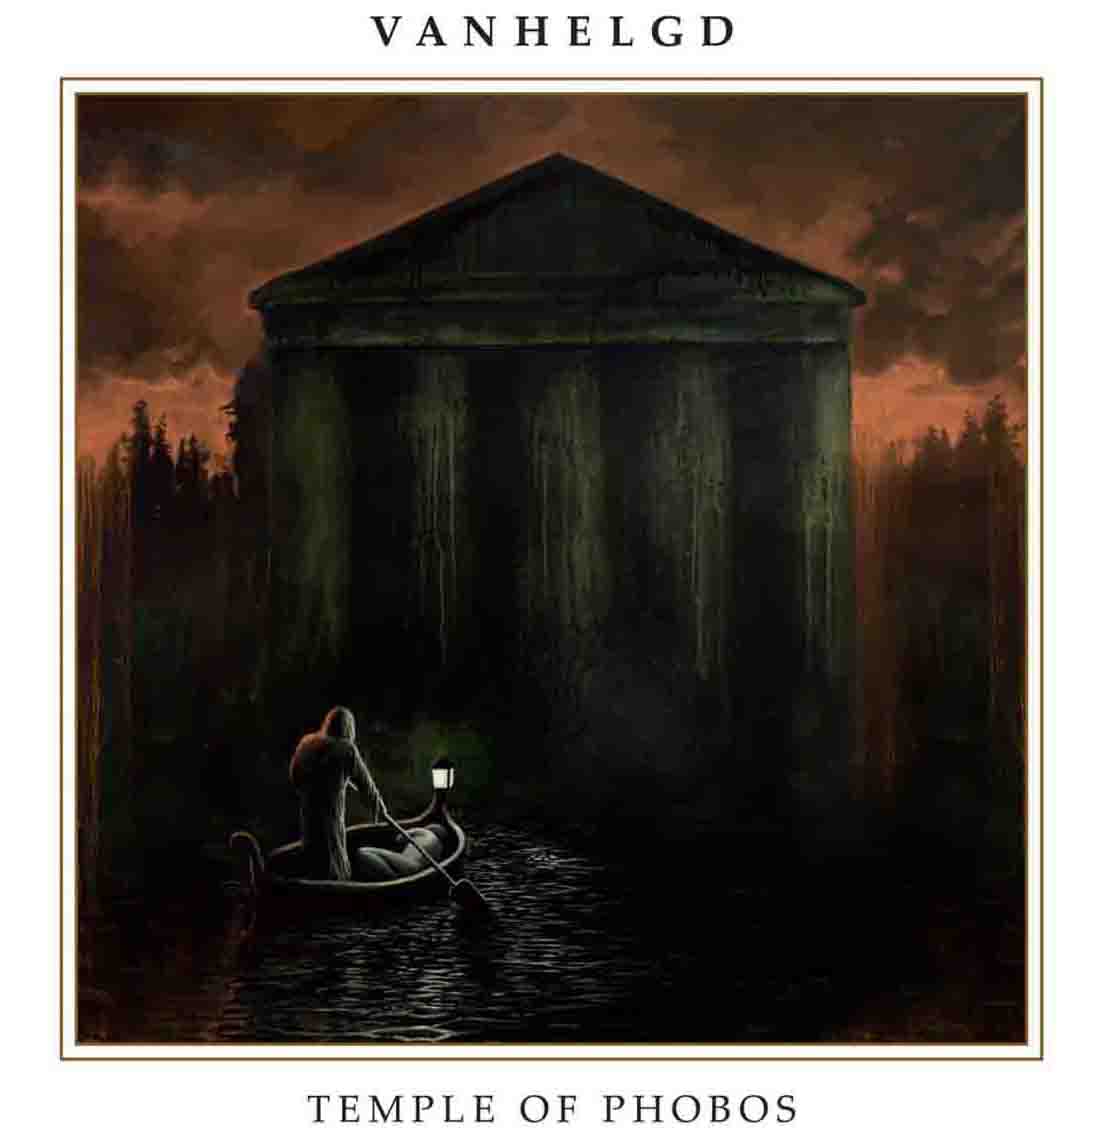 VANHELGD - Temple of Phobos cover 